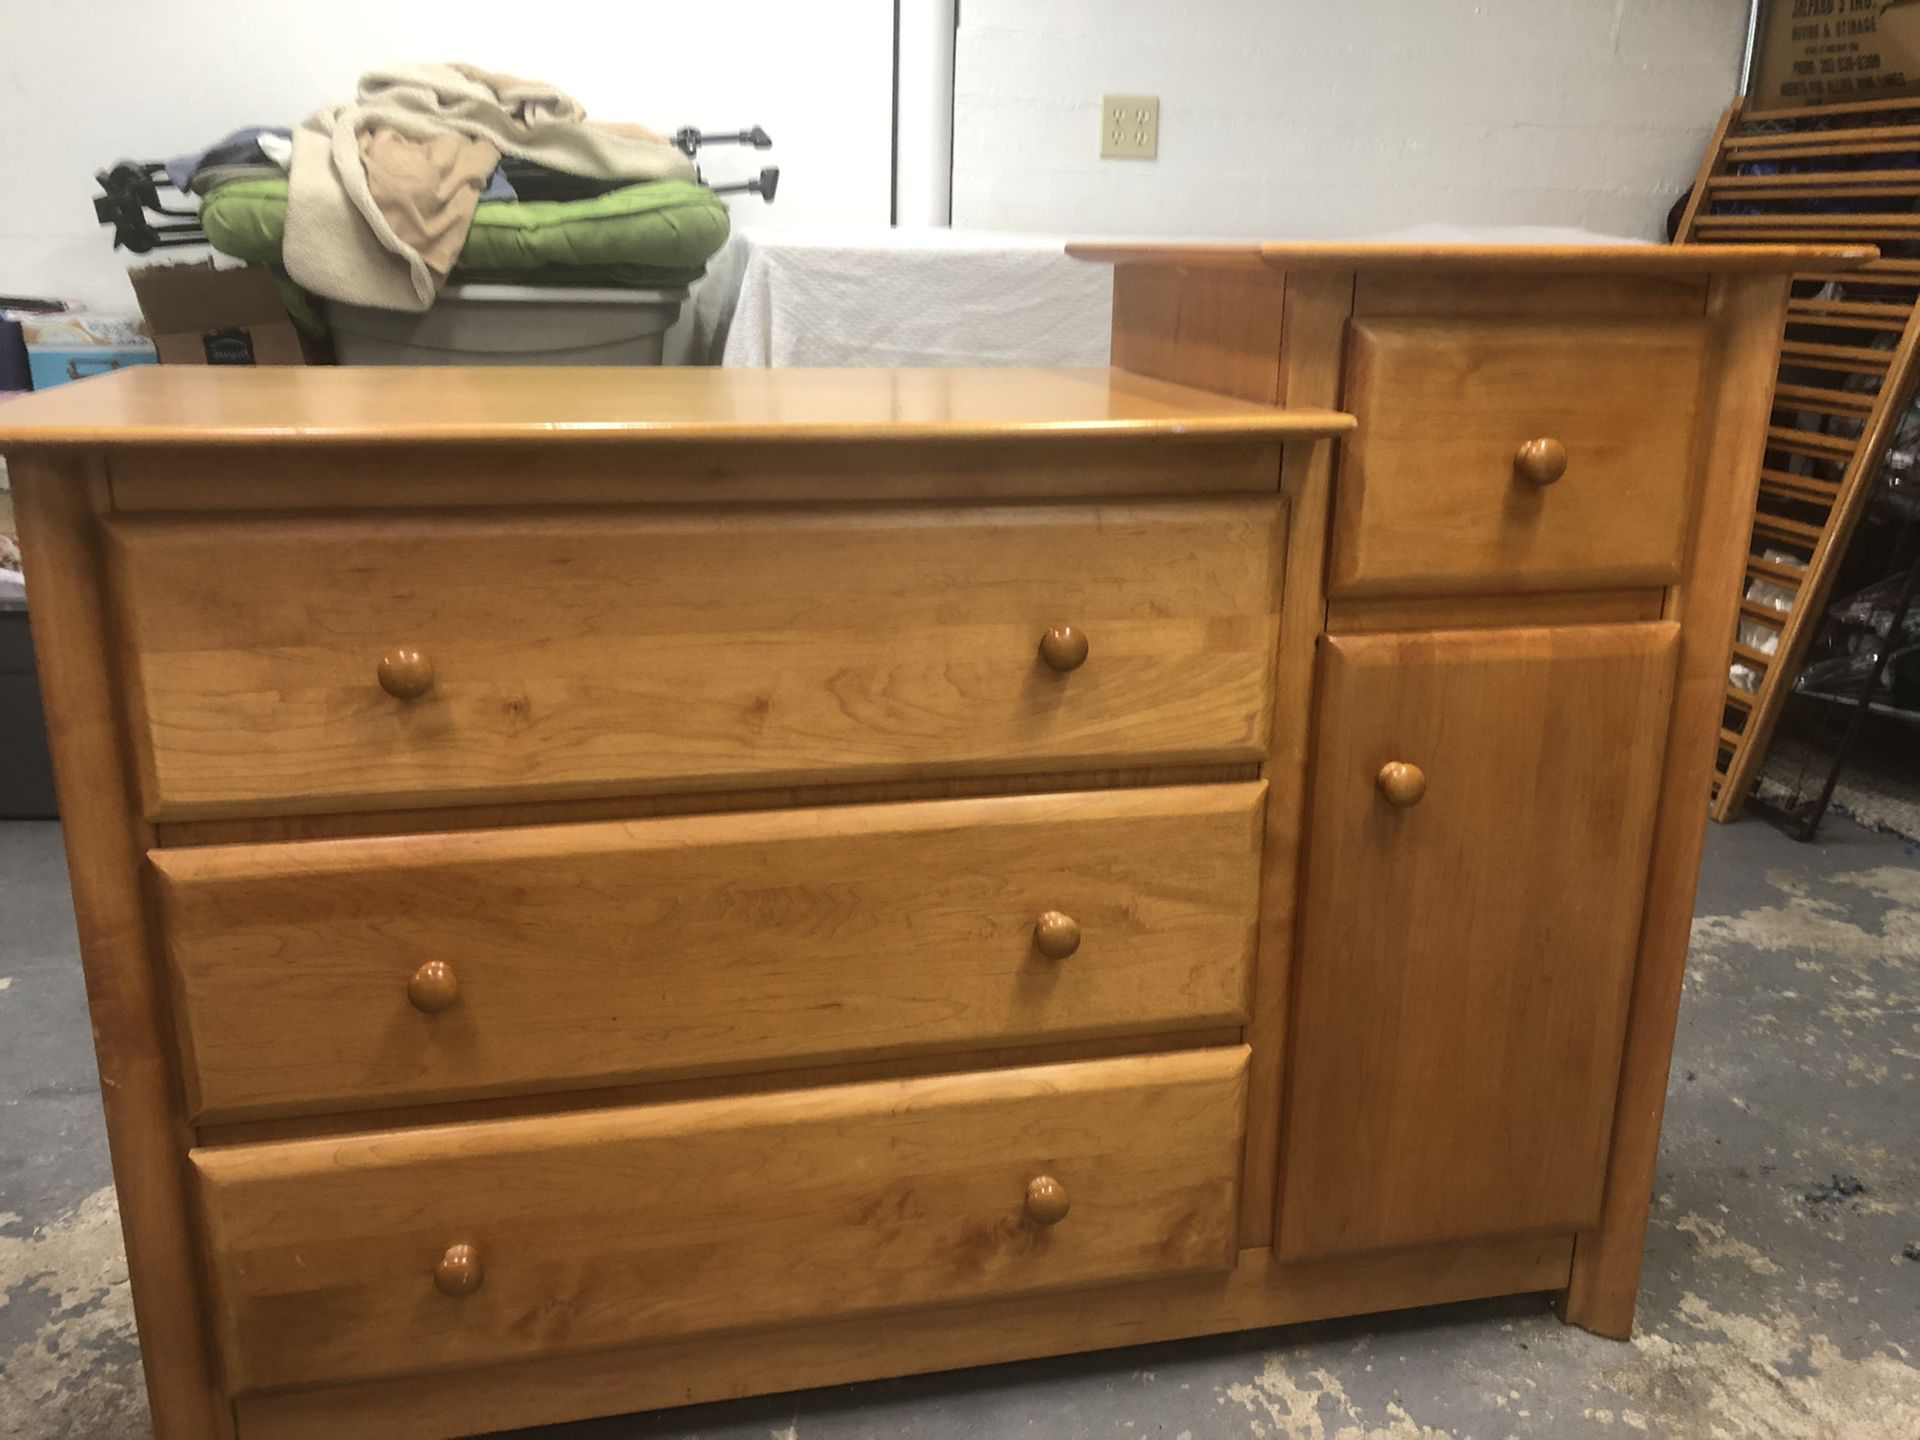 FREE DRESSER/CHANGING TABLE and crib